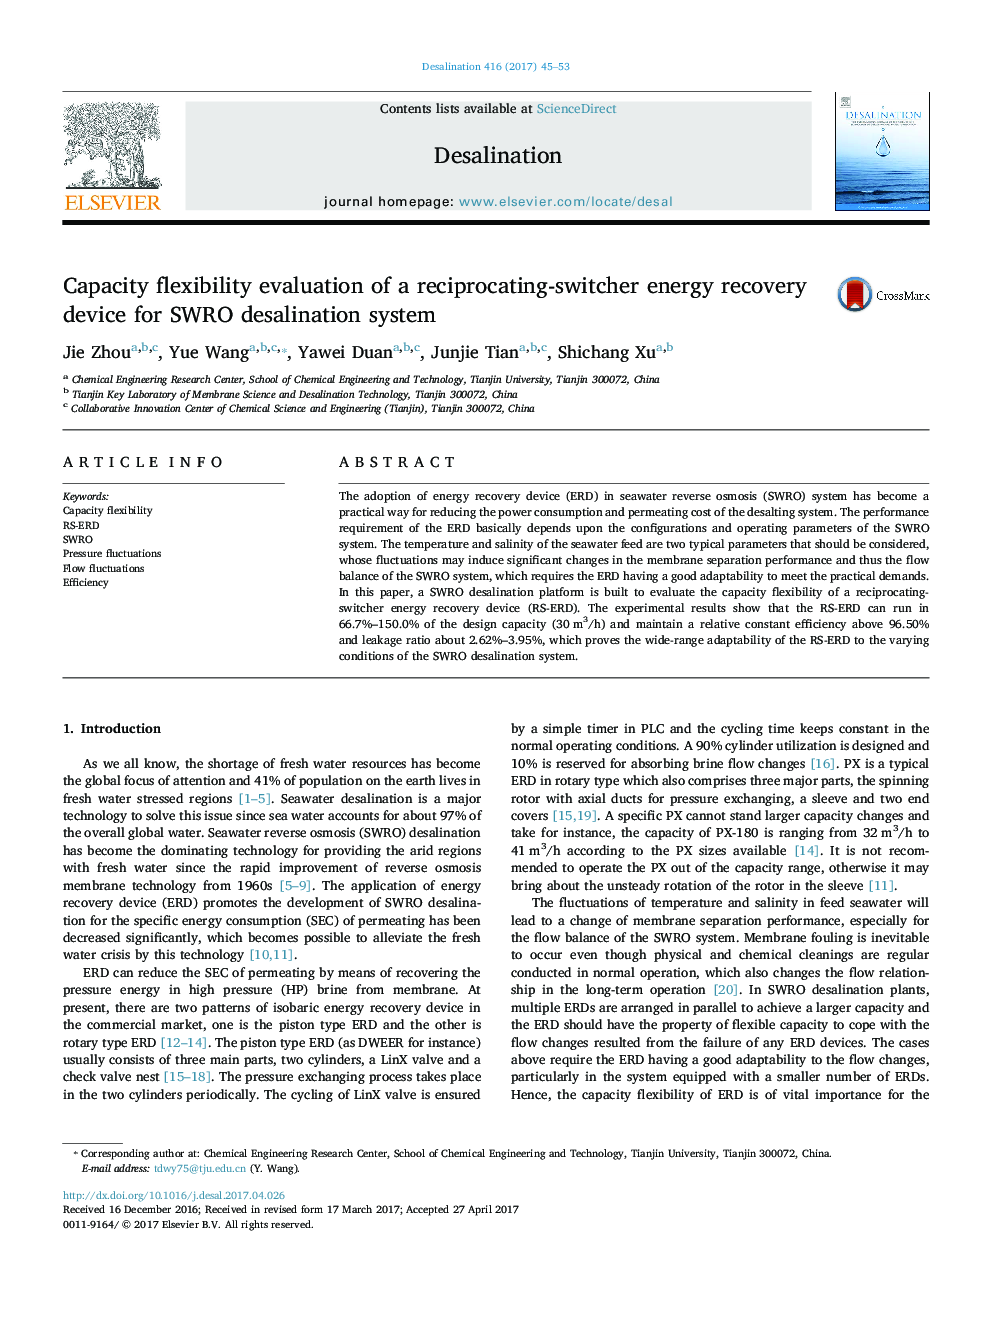 Capacity flexibility evaluation of a reciprocating-switcher energy recovery device for SWRO desalination system